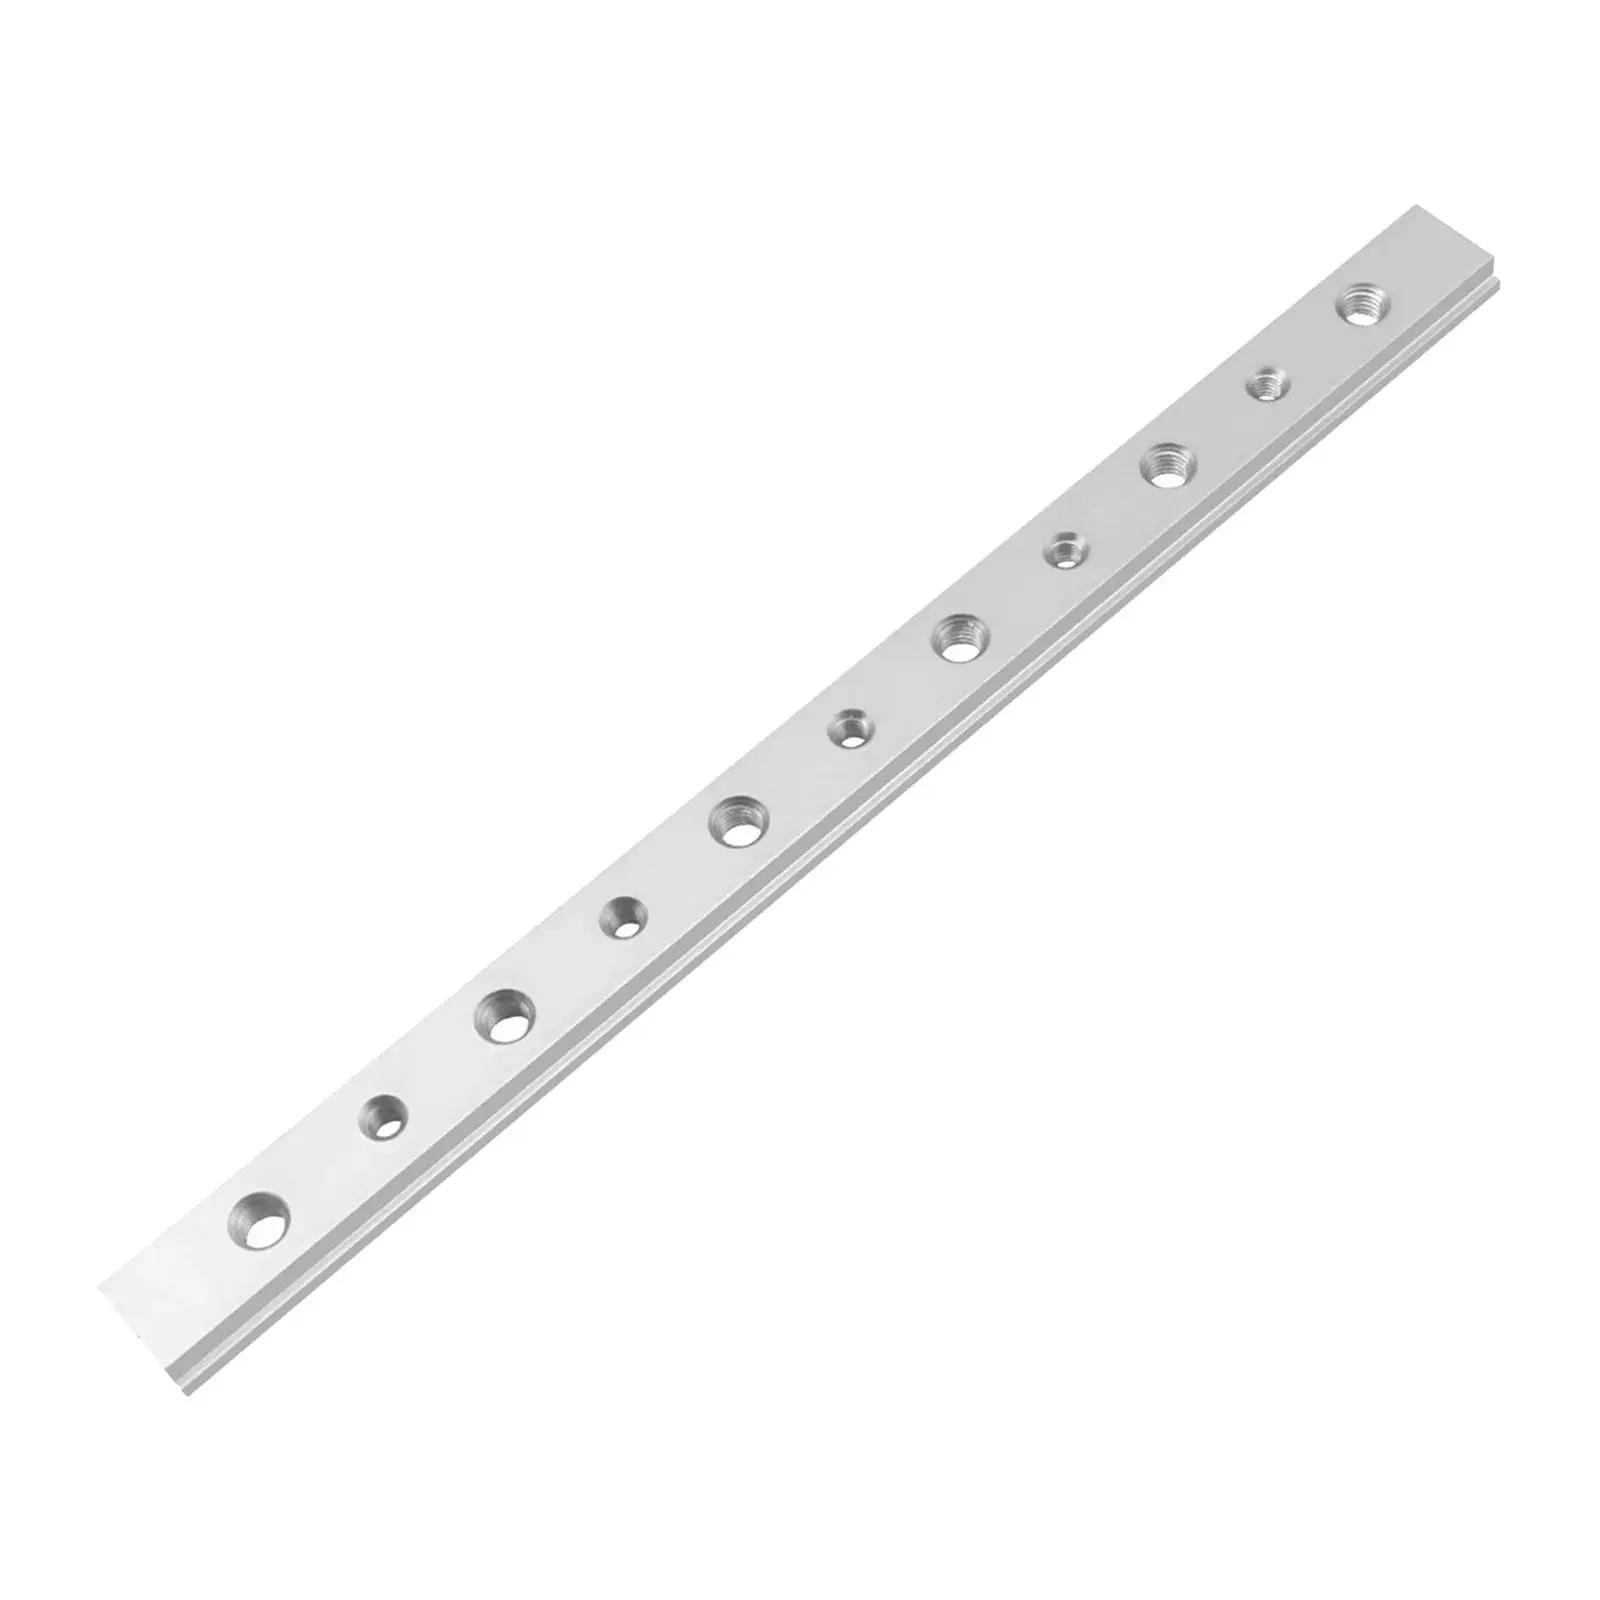 Aluminium Alloy Miter Bar Durable Perfect Sliding Action Woodworking Tool Adjustable 300mm / 11.81`` Table Saw Gauge Rod